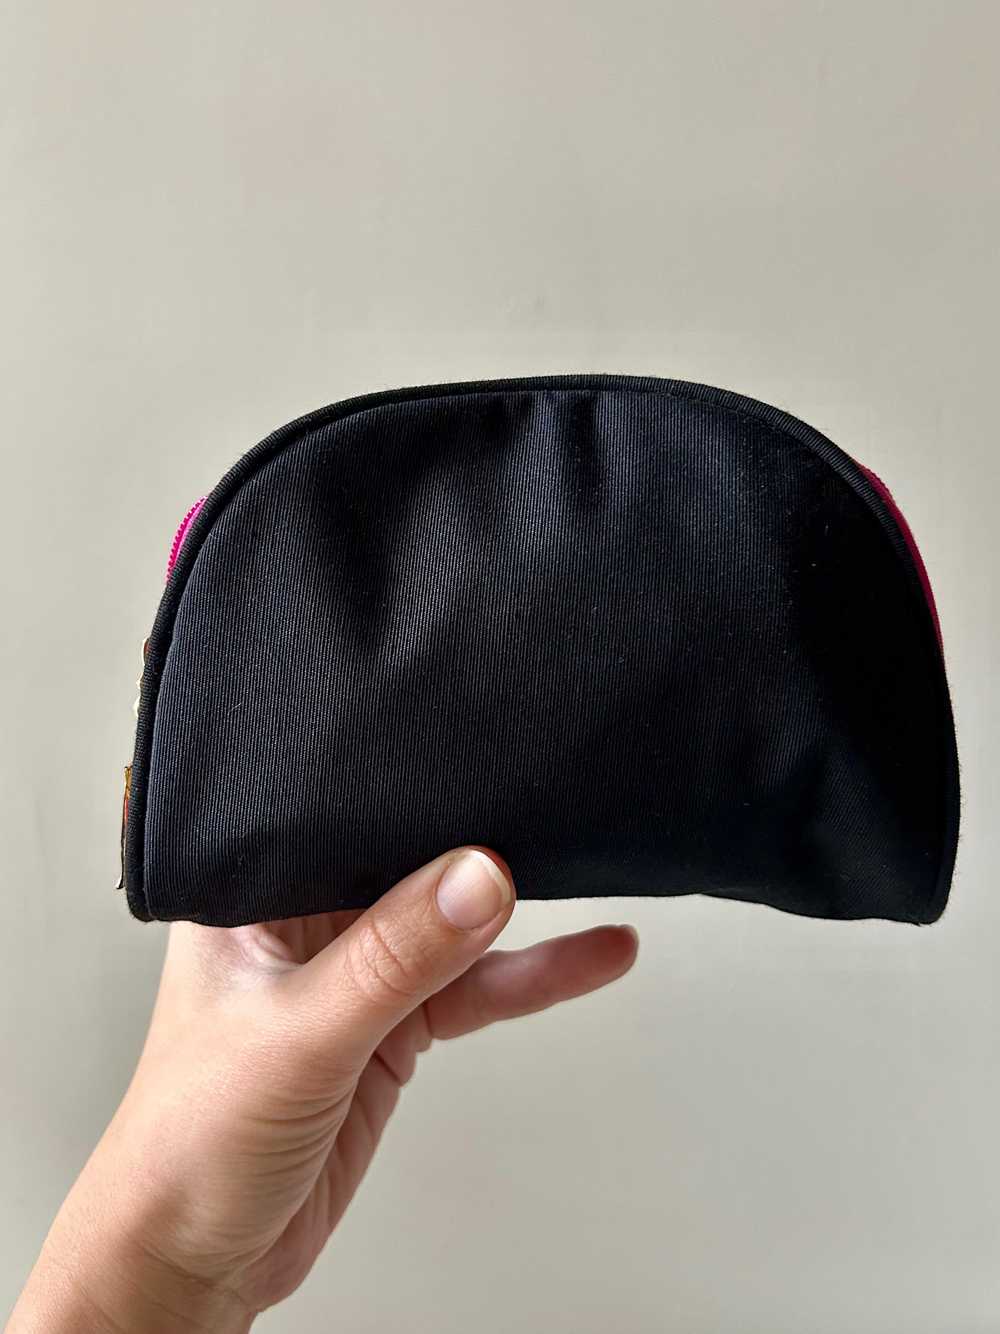 Vintage YSL Black and Hot Pink Makeup Pouch - image 5